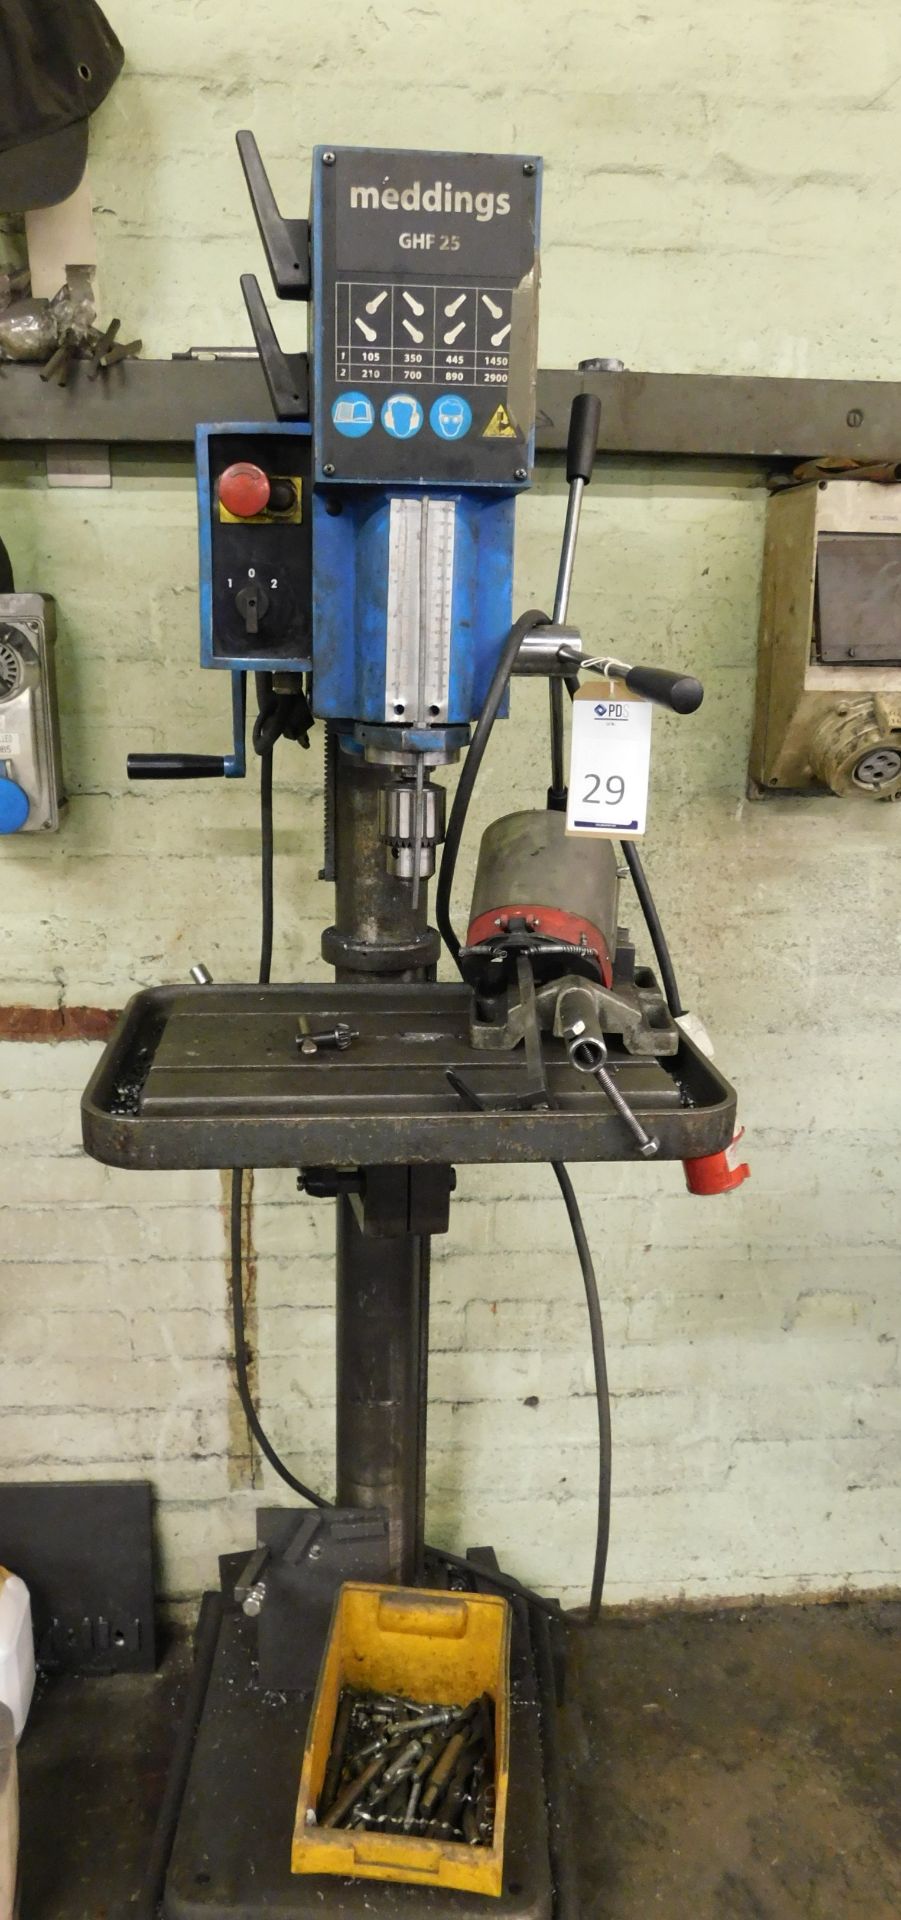 Meddings GF25 Heavy Duty Pedestal Drill (2016) with Rise & Fall T-Slotted Table, Serial Number